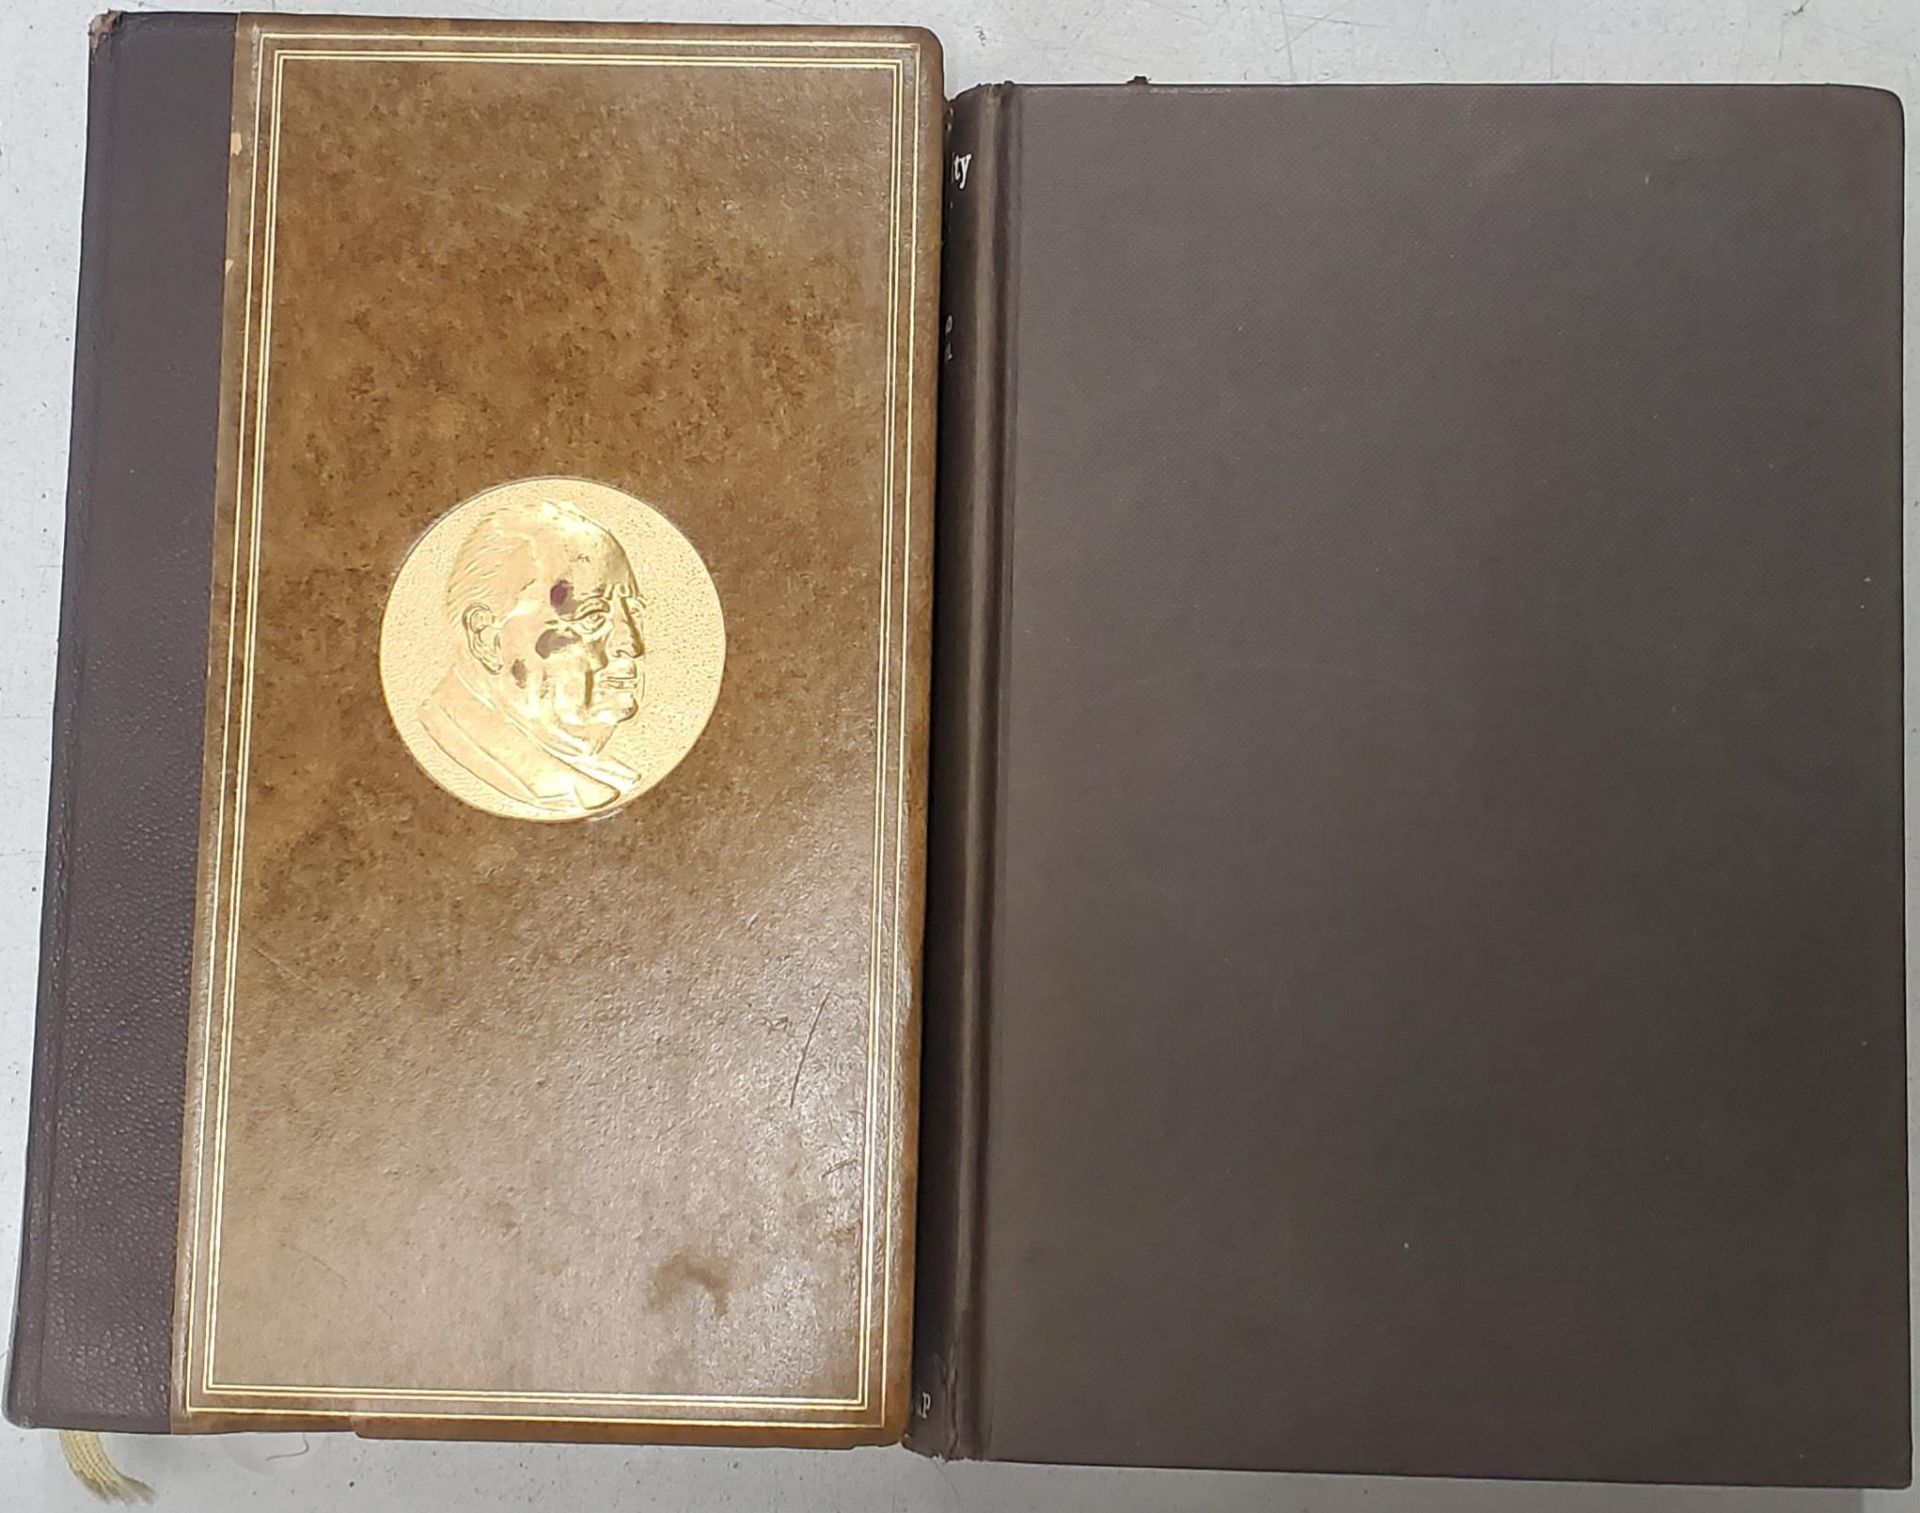 A COPY OF 'ADMIRALTY BRIEF' BY EDWARD TERRELL, 1958 AND A COPY OF WINSTON CHURCHILLS 'THE SECOND